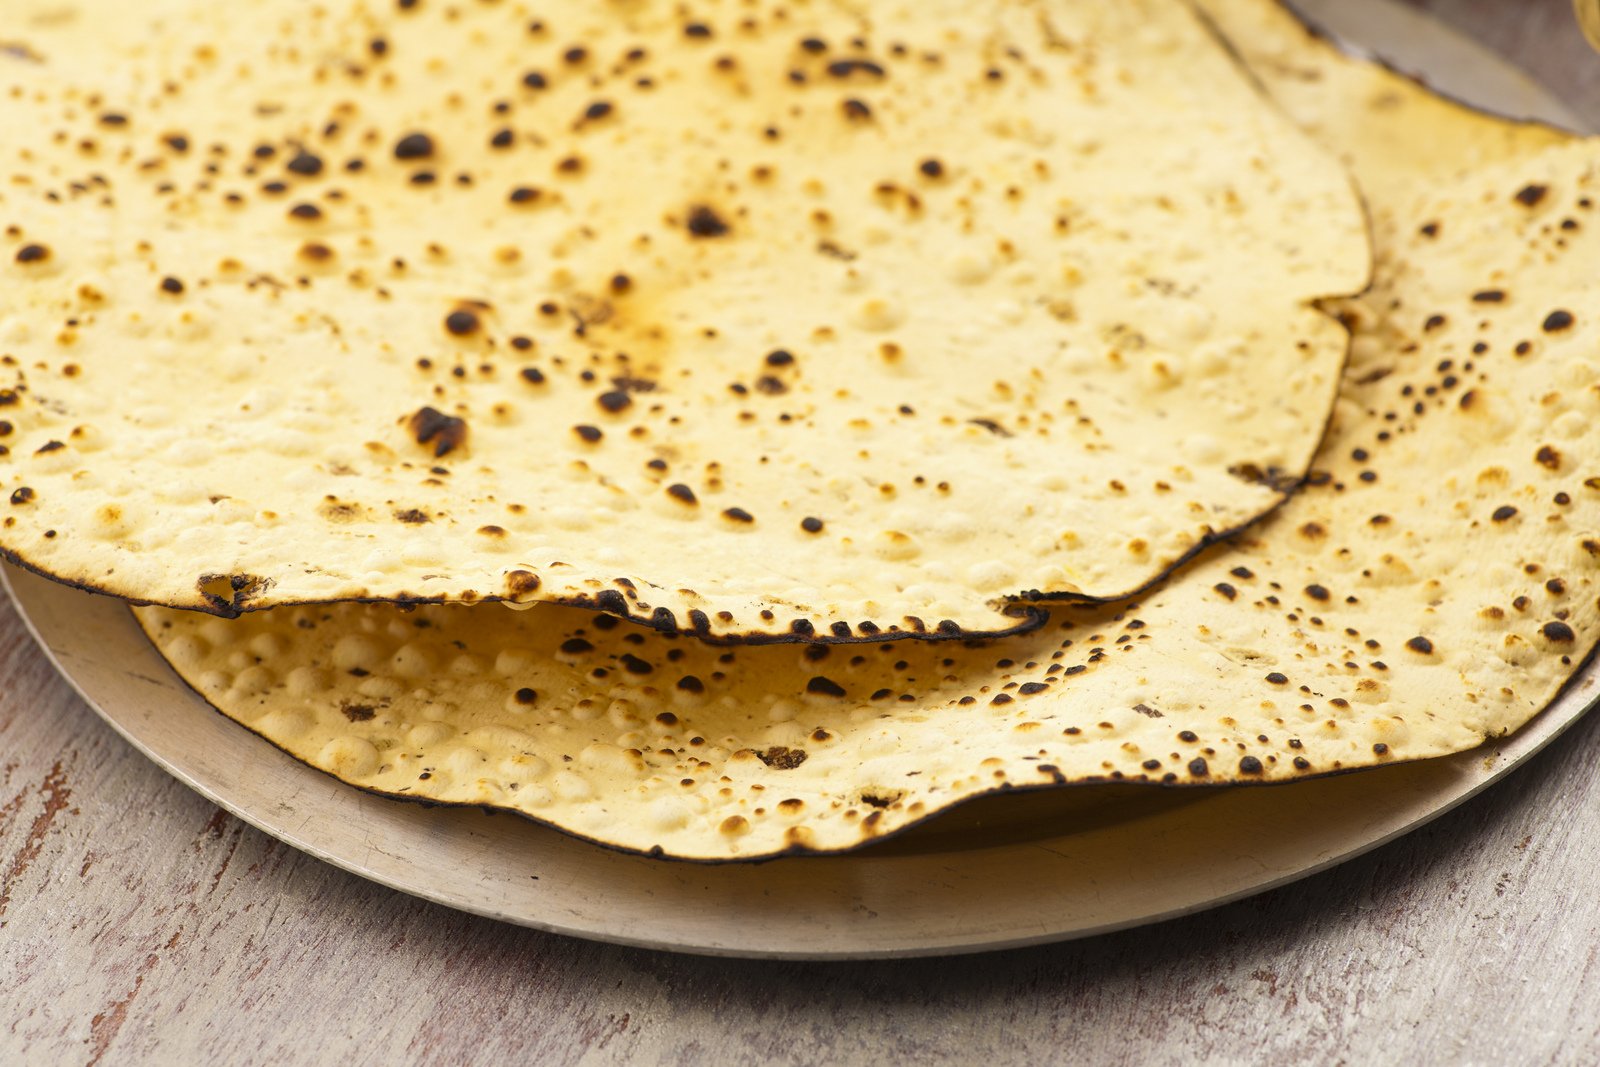 How to Make Papad in Microwave? 